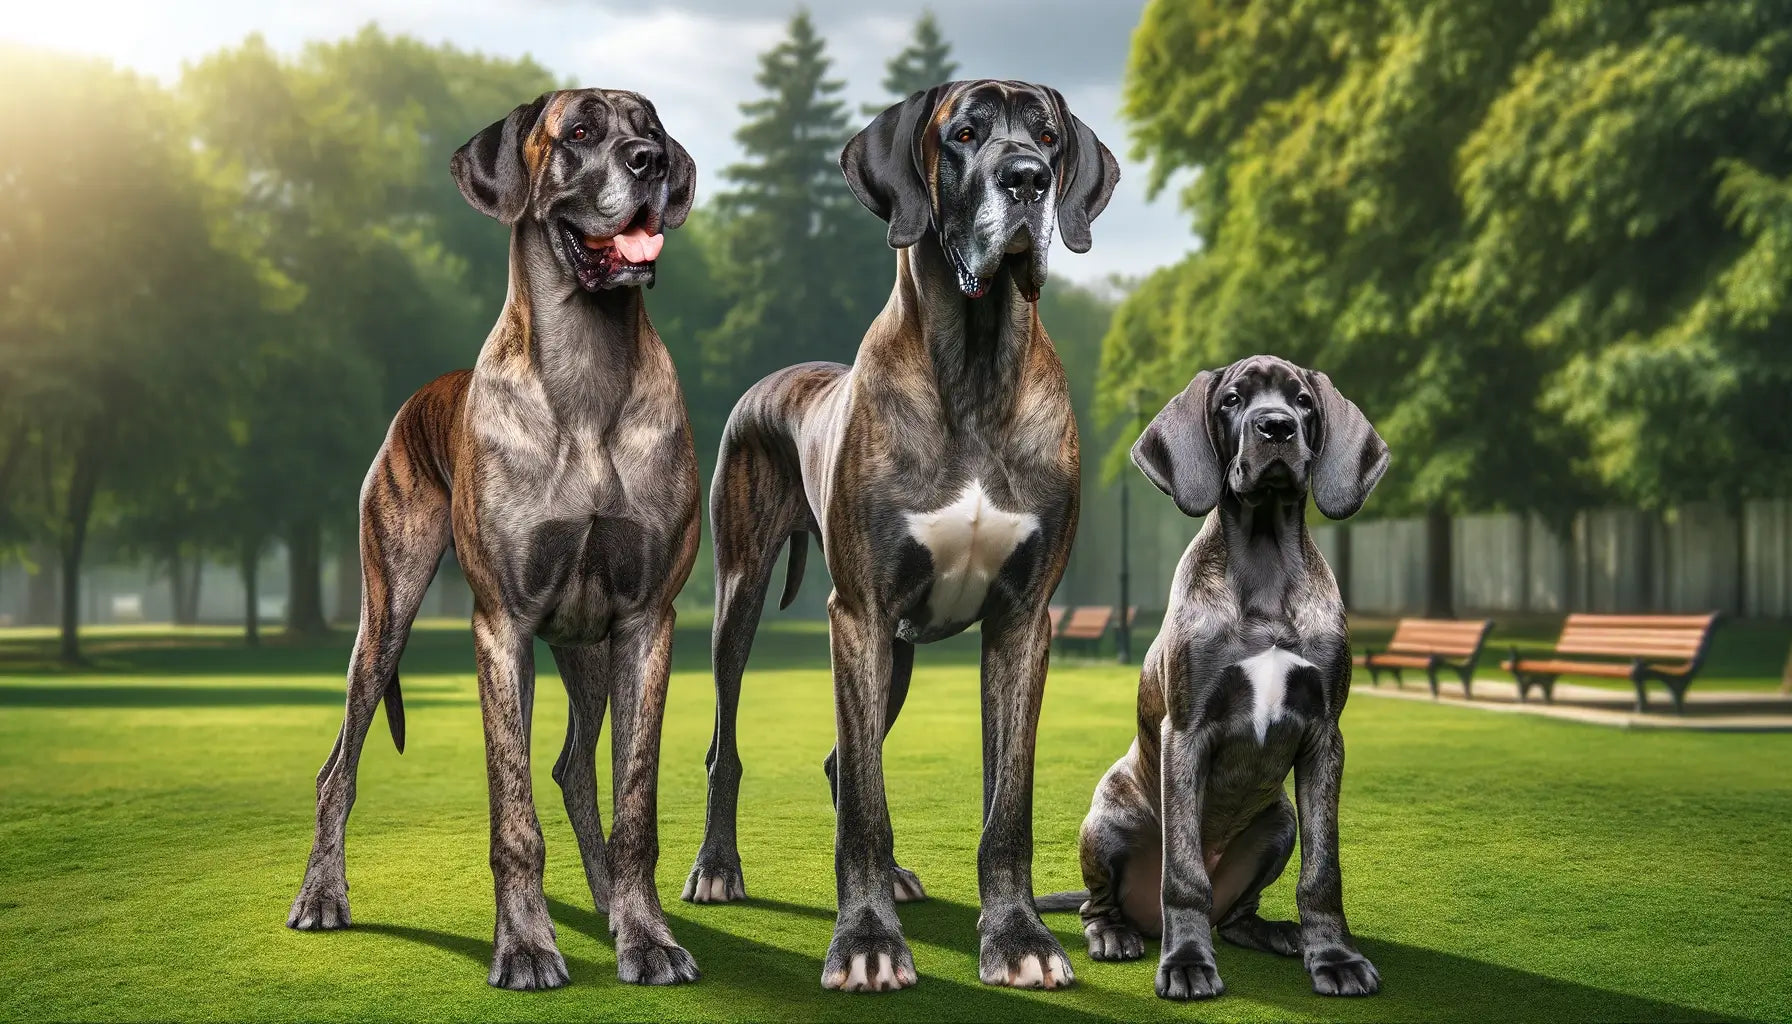 Brindle Great Dane male and female standing side by side in a park.